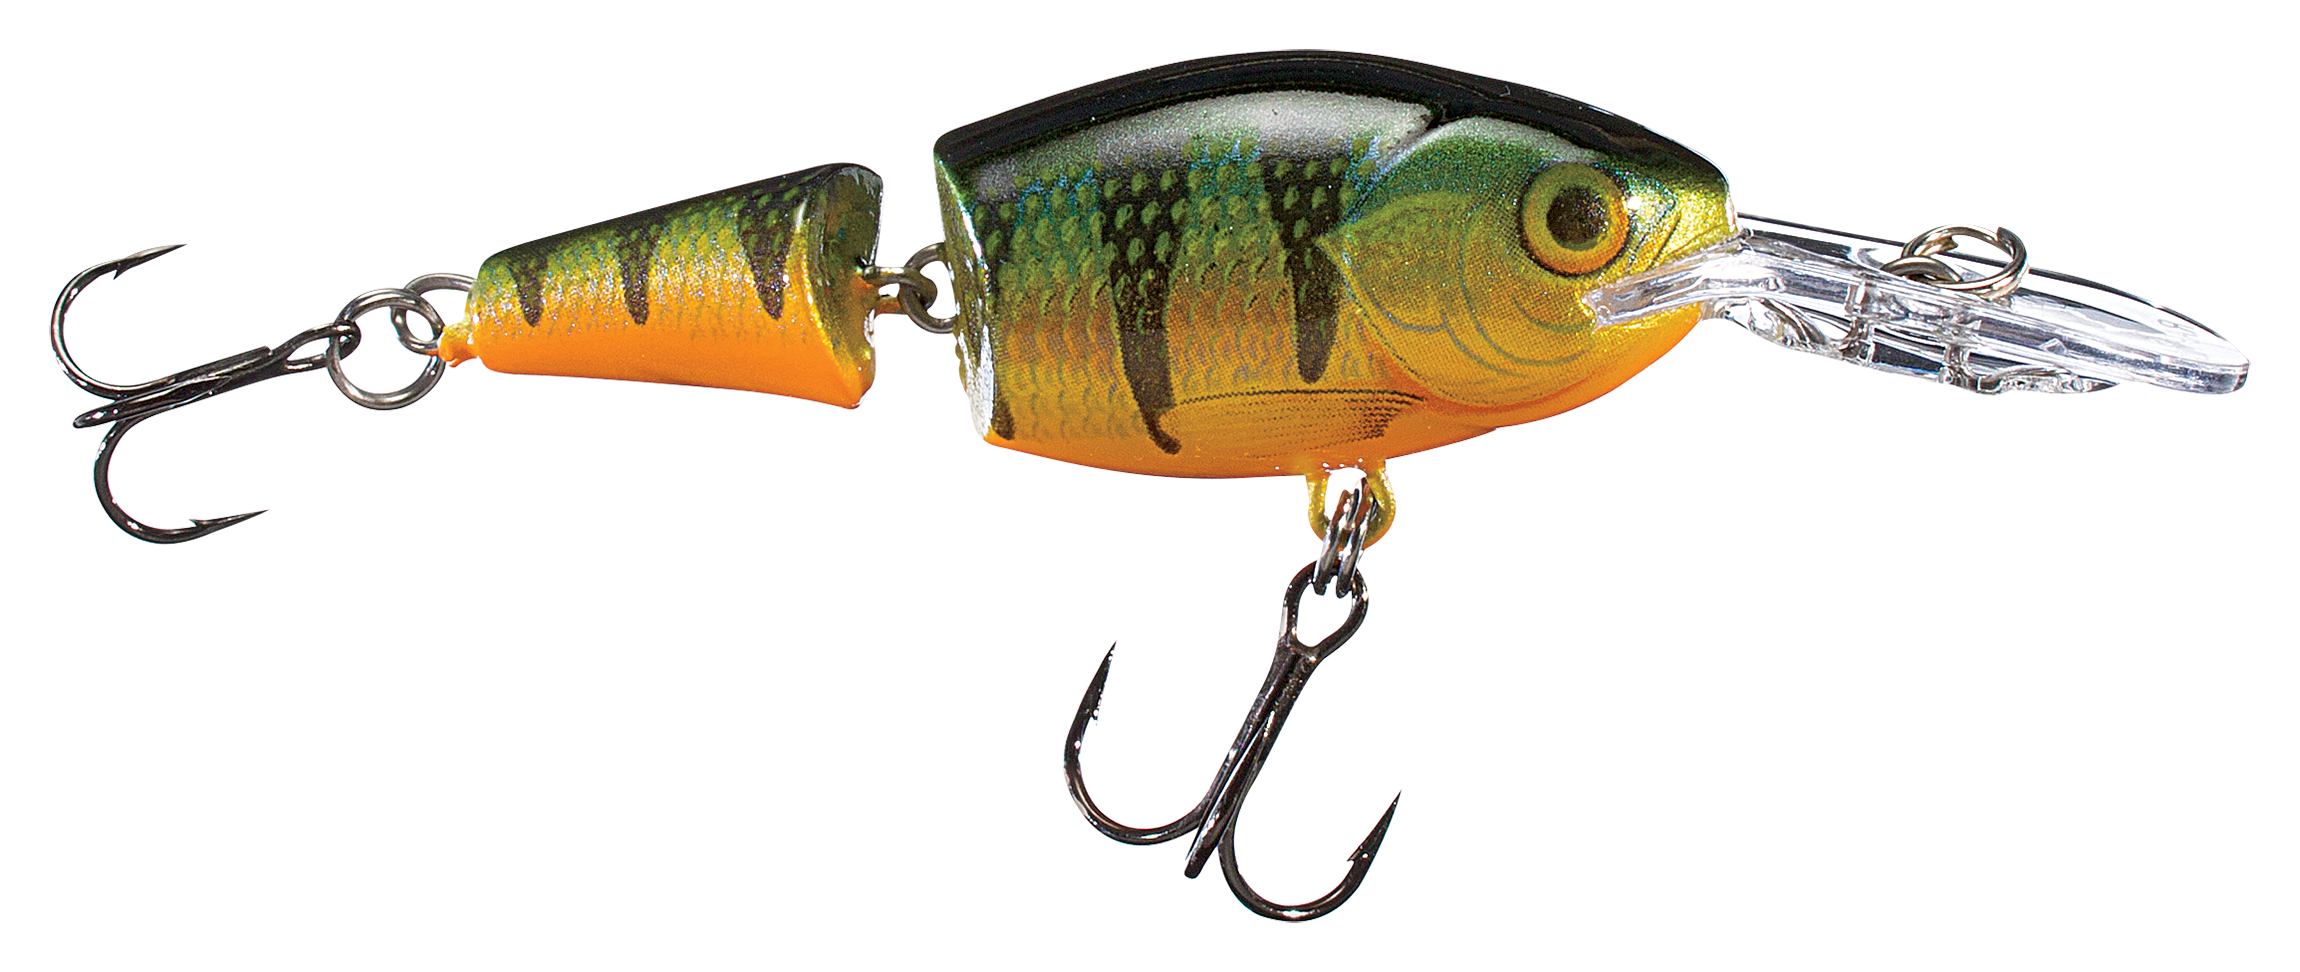 RAPALA J-5, J05 G in GOLD JOINTED MINNOW, 2, 1/8oz - Crappie/Perch/Trout/Bass